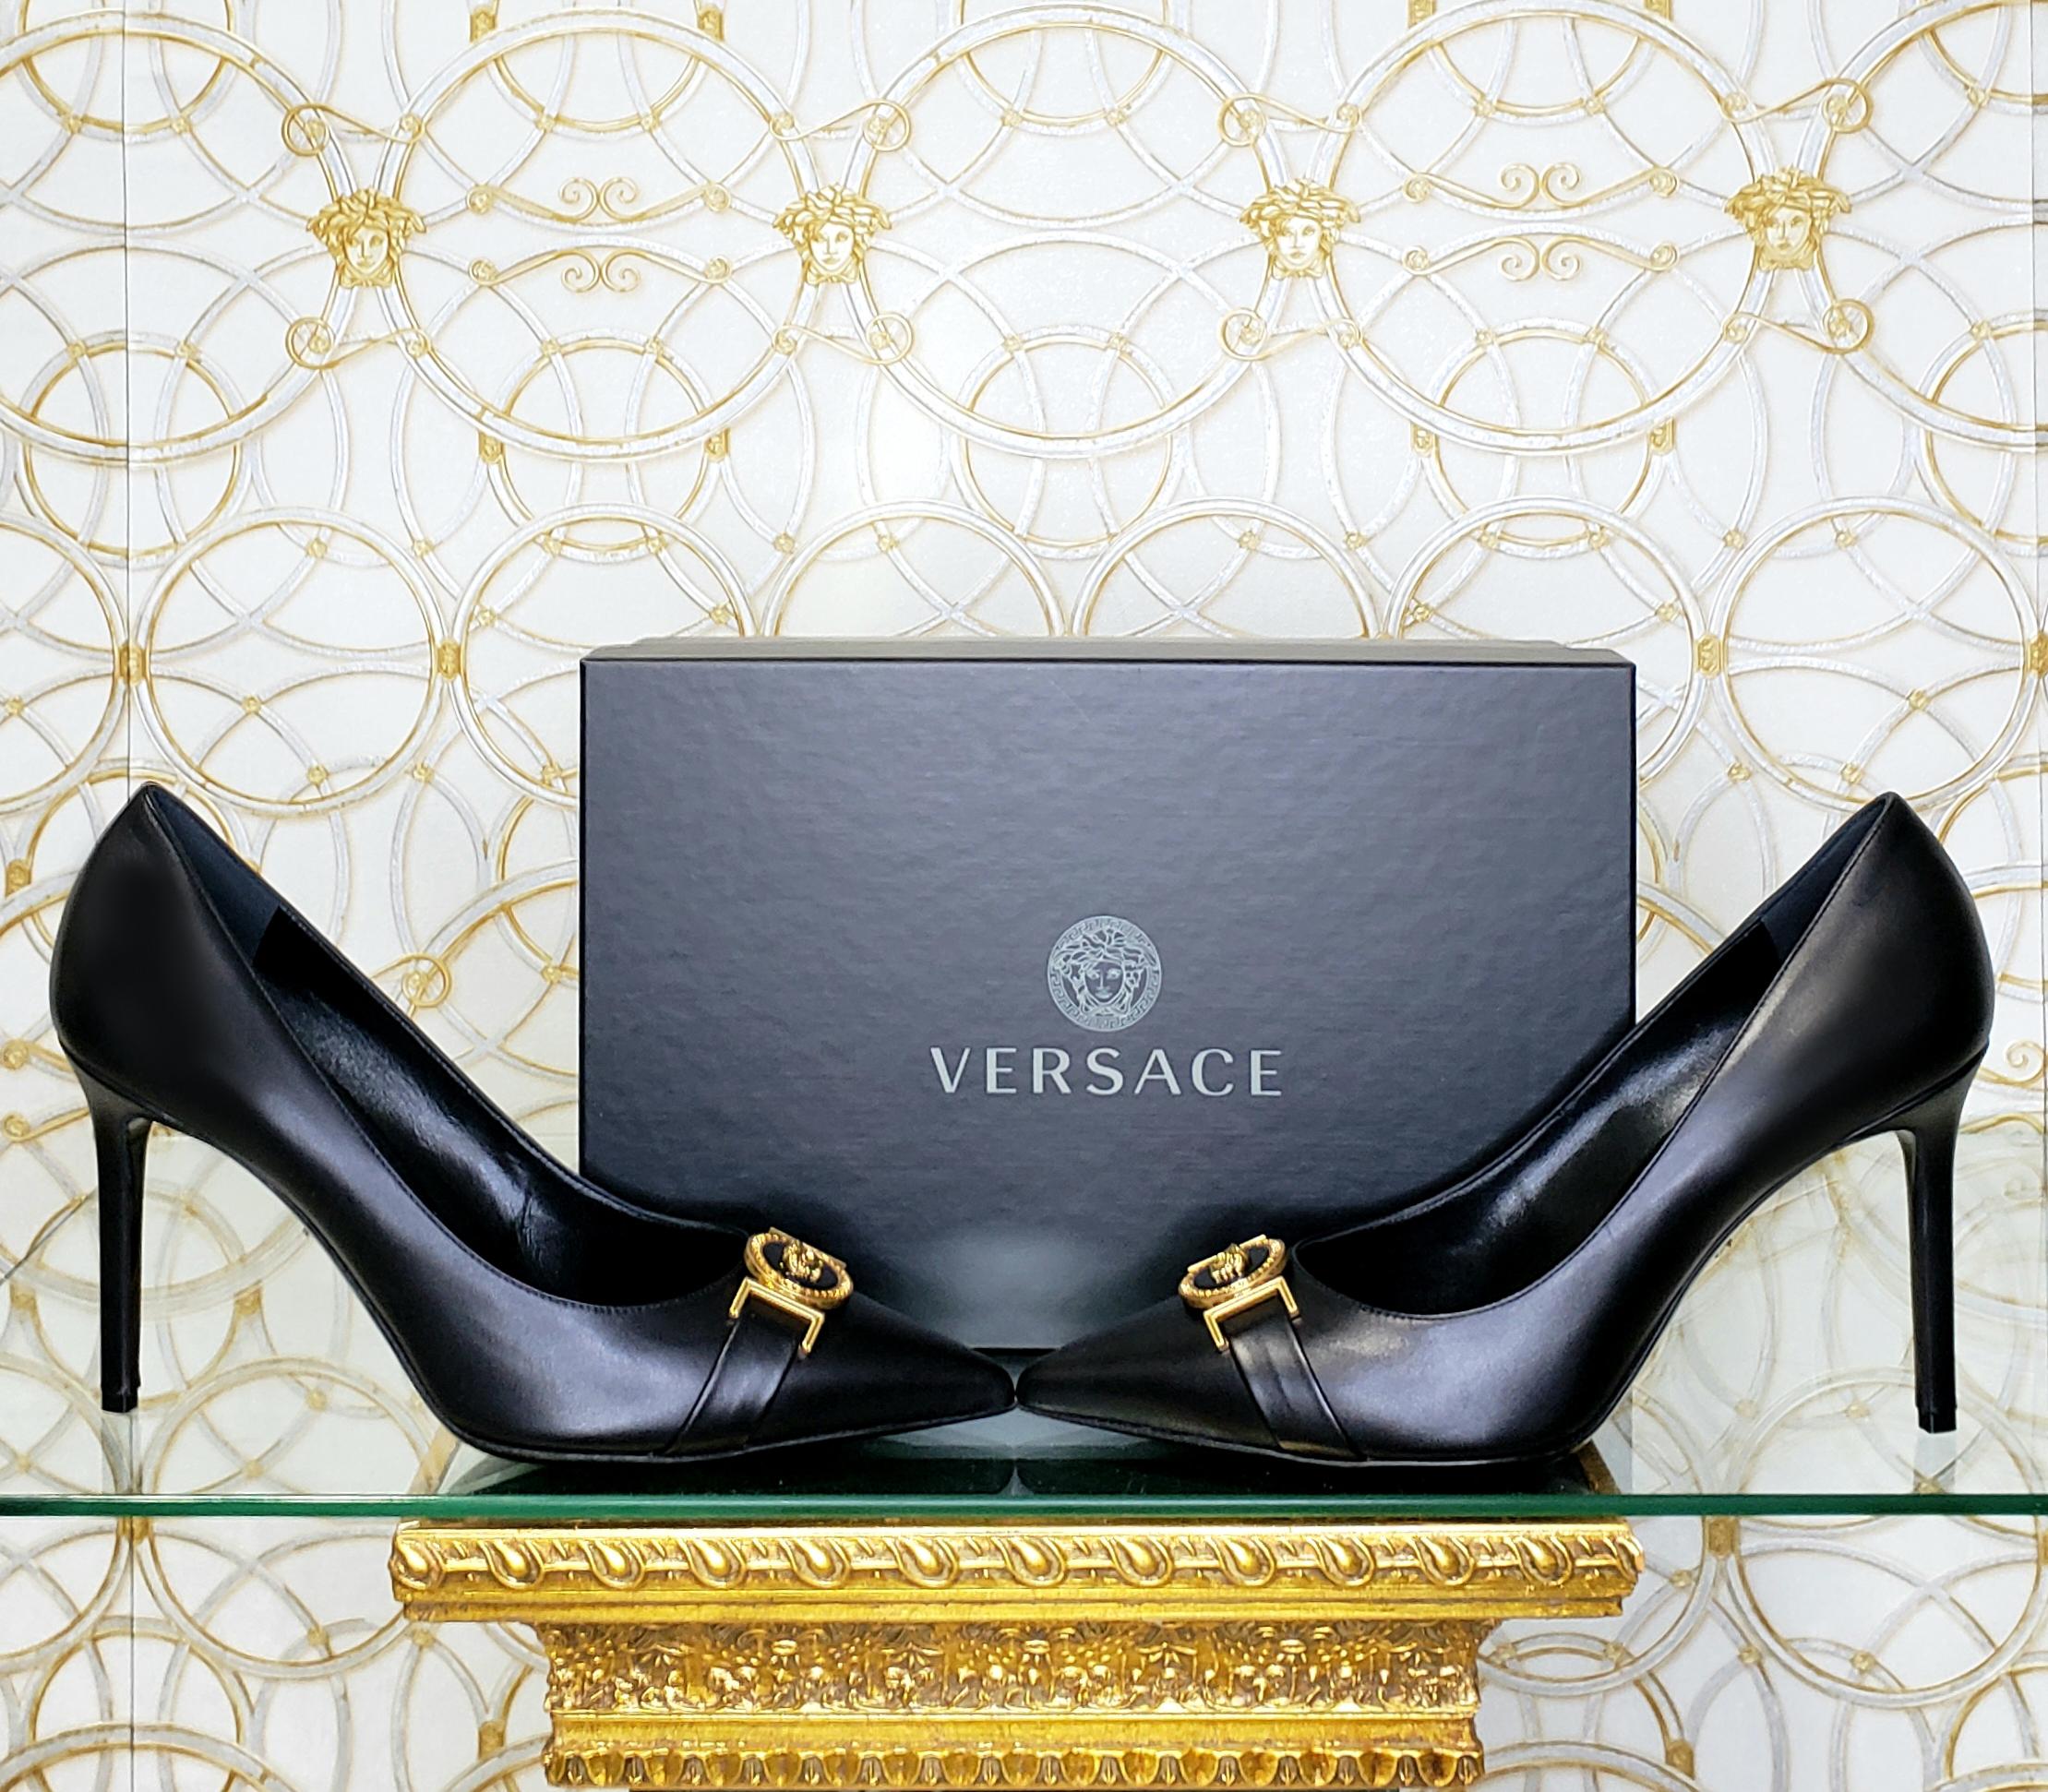 VERSACE

Black leather shoes with gold Medusa buckle and stiletto heel

DETAILS:

Closed toe

Medusa plaque

Content: 100% Leather (Lining and Sole) 

 Color: Black

Heel: 4 inches

Size 40 - US 10 insole: 10 3/4